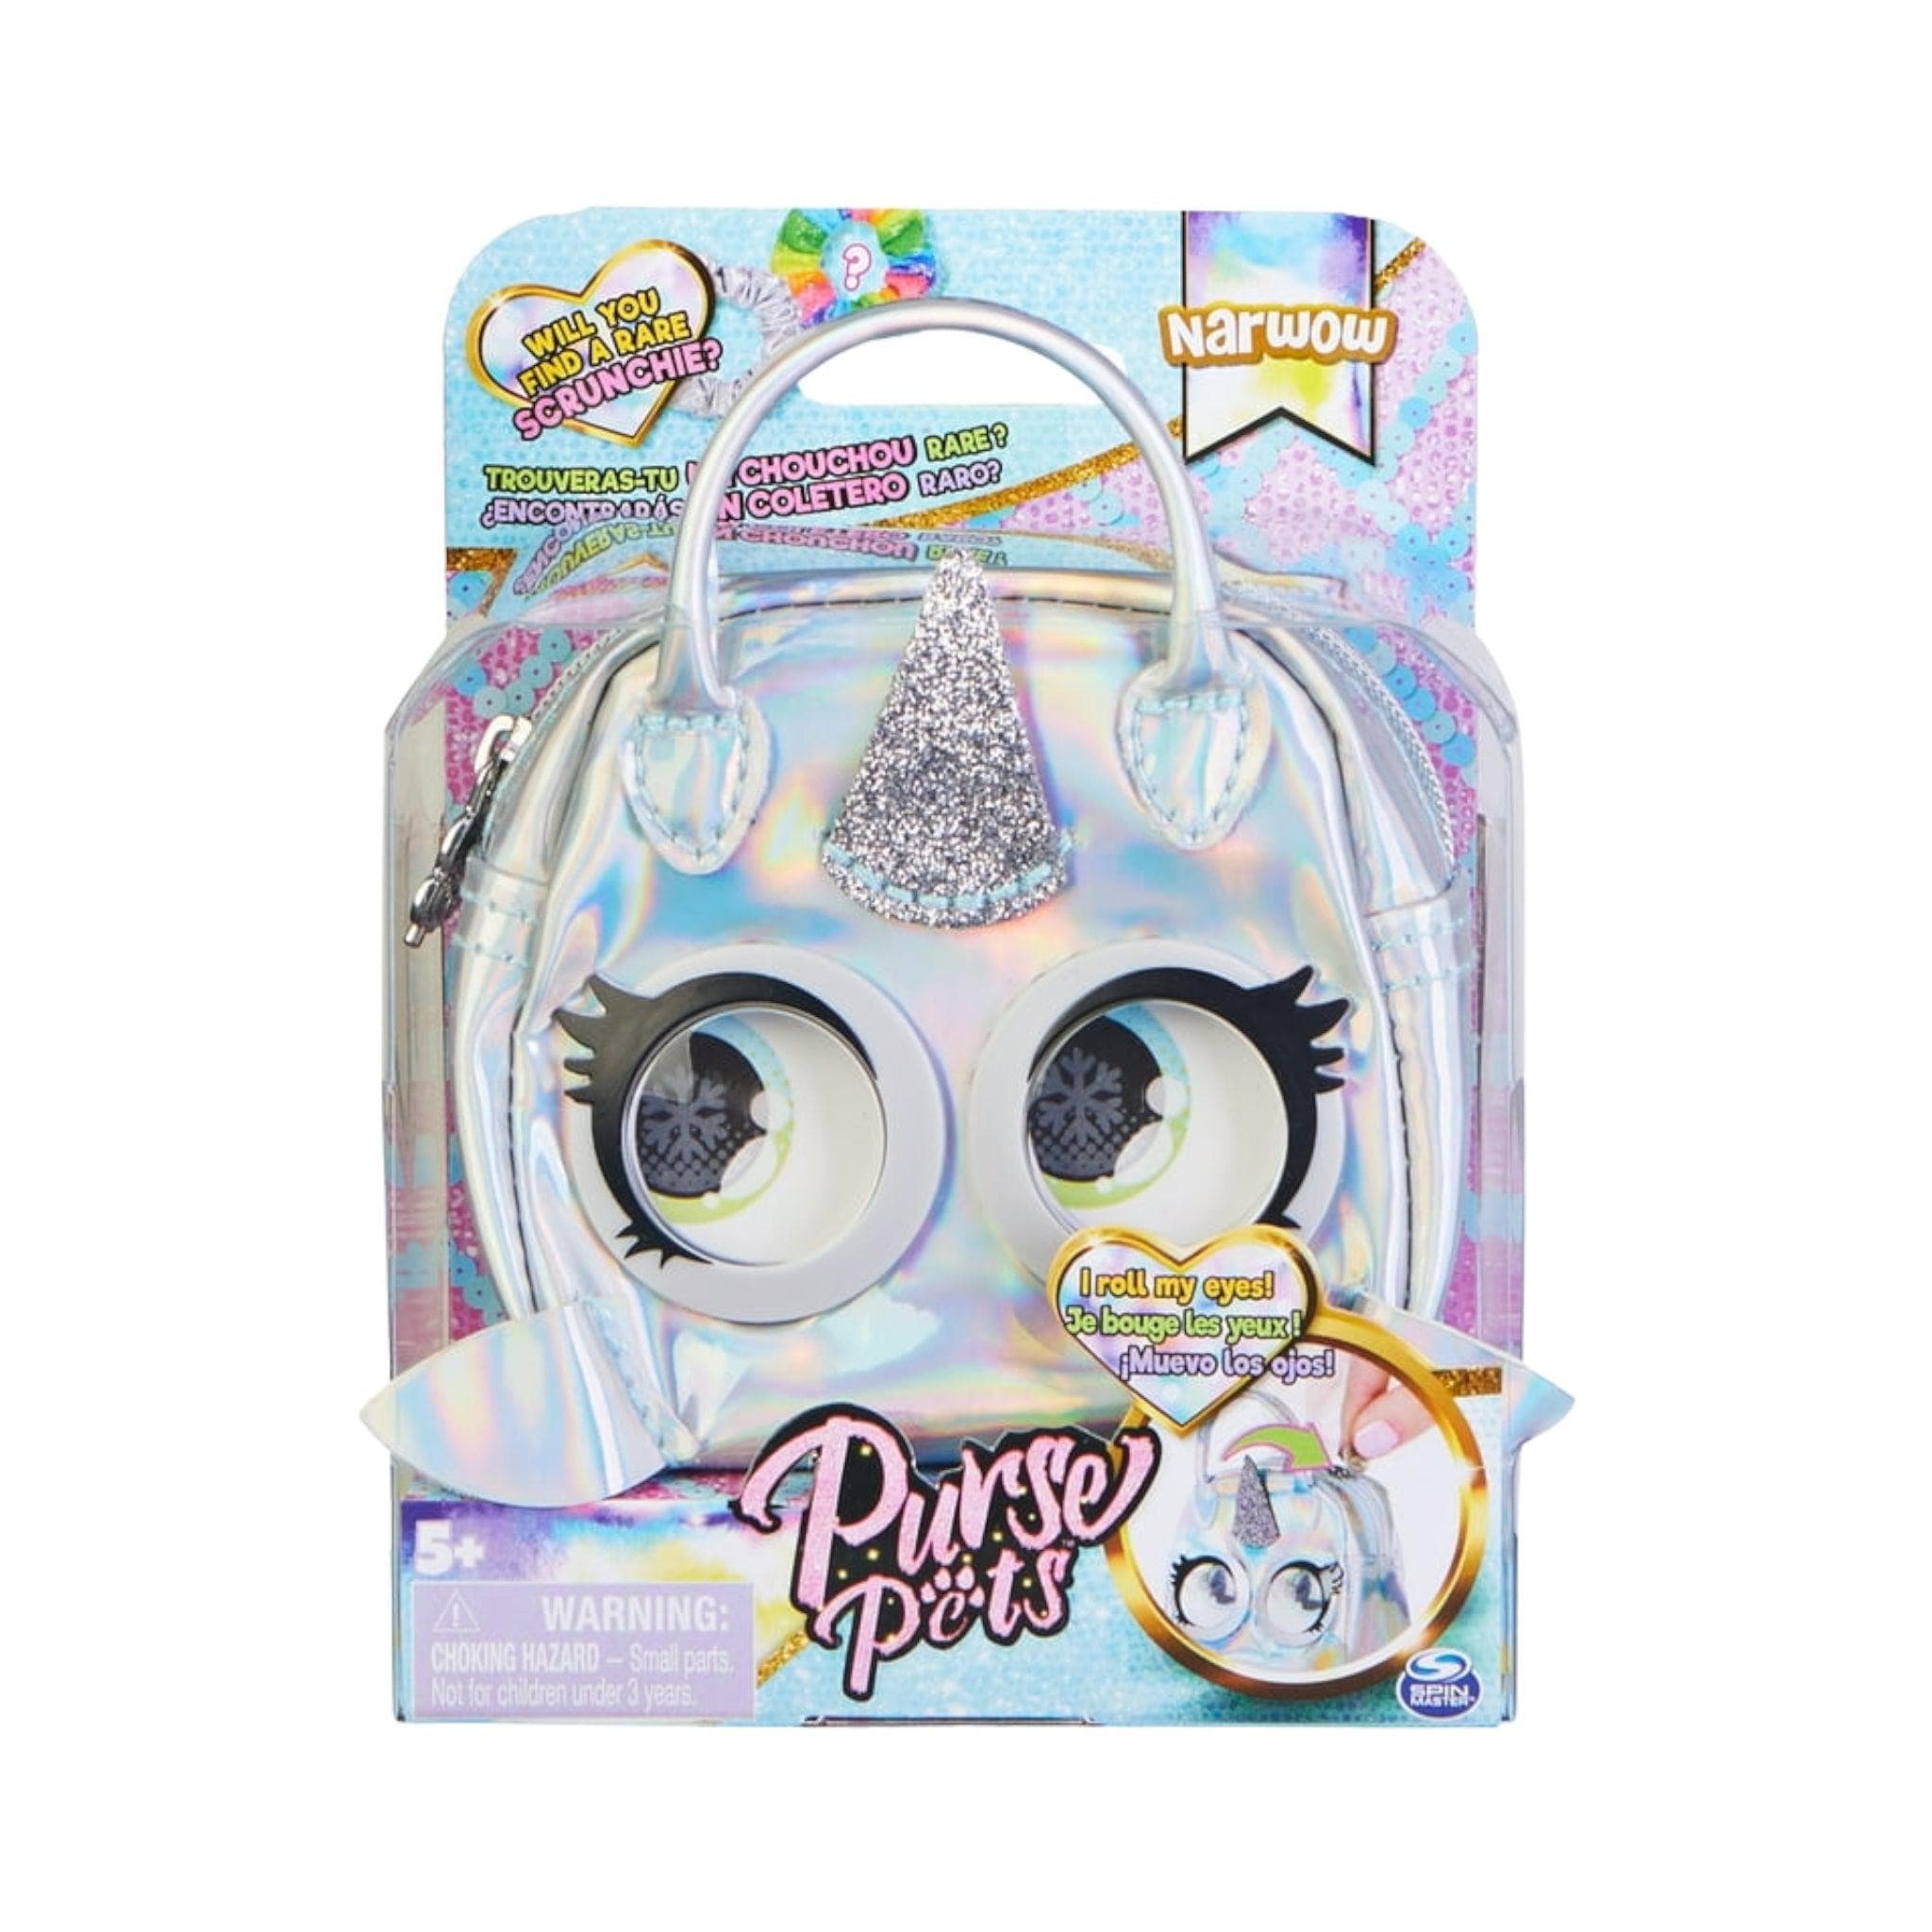 Purse Pets, Spin Master